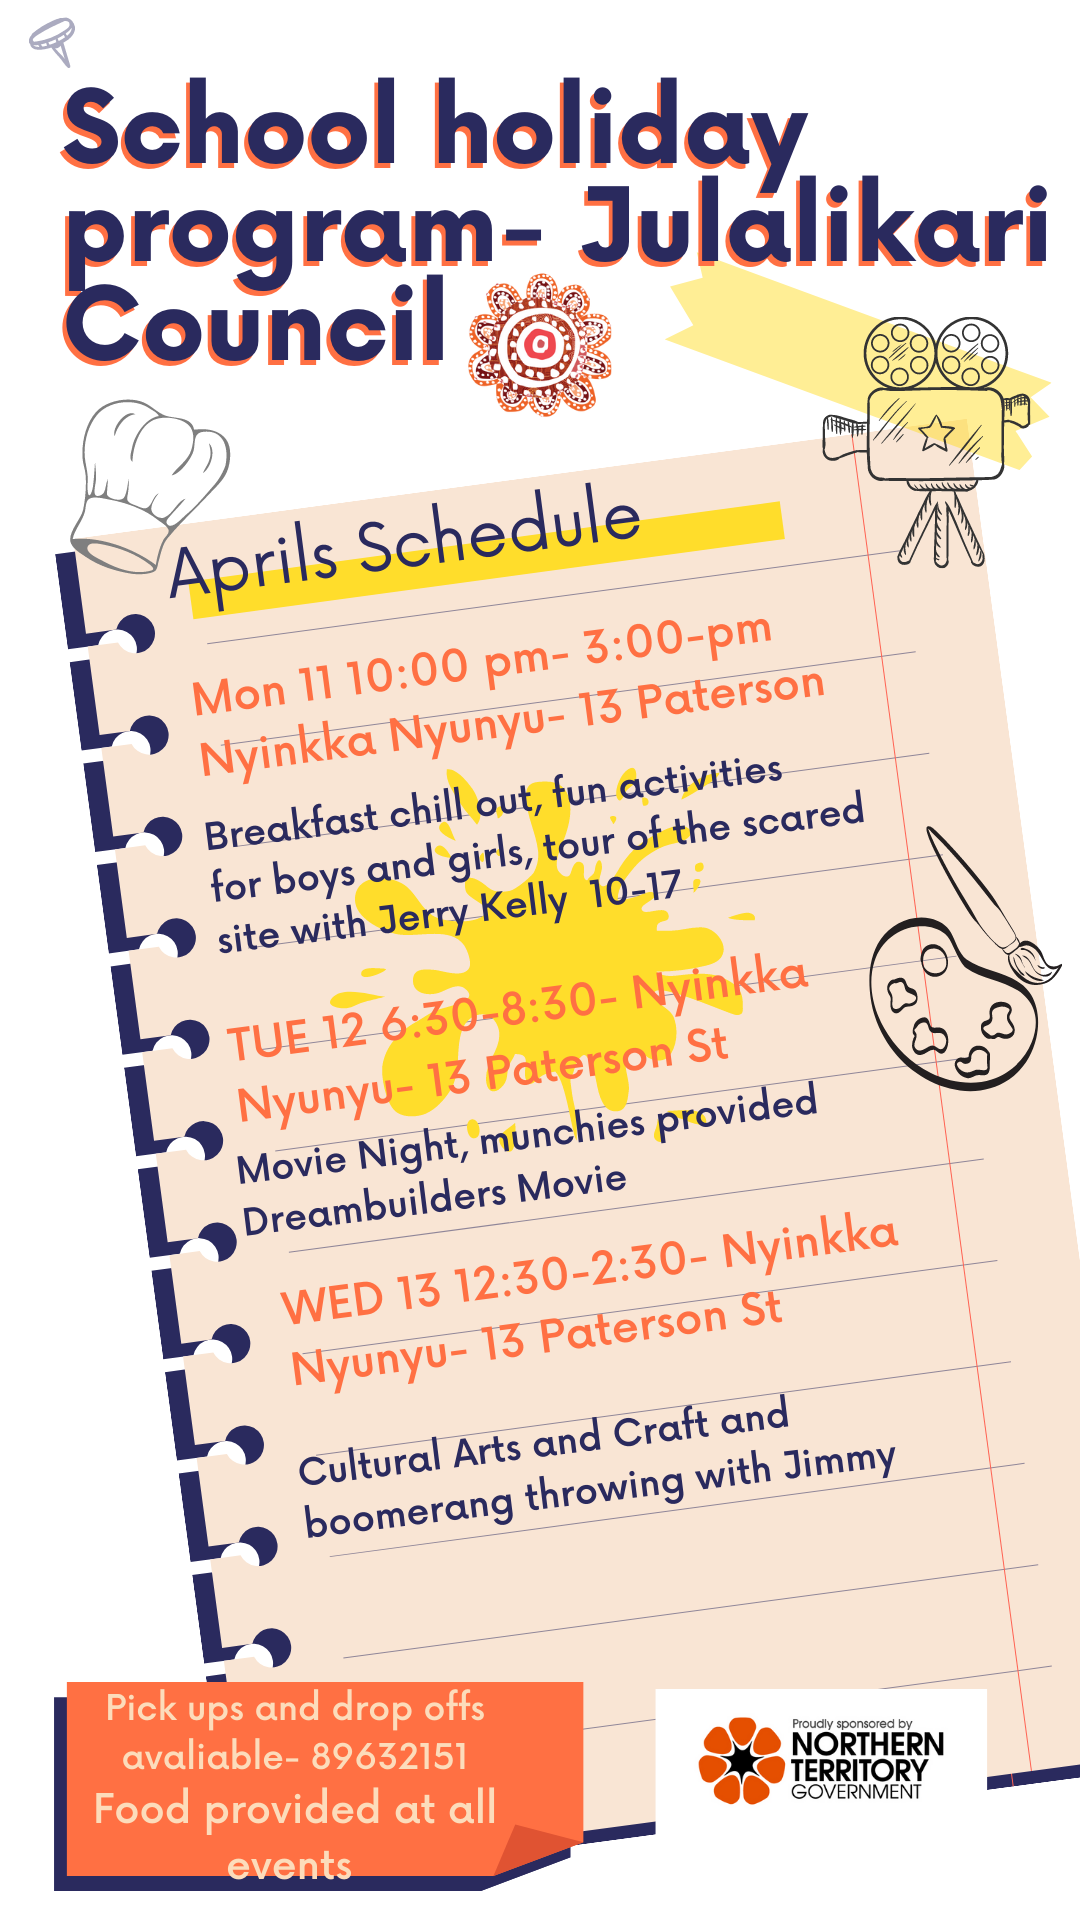 Julalikari sets out to put on deadly activities for the April 2022 school holidays- All youth members of the community are welcomed to come and participate!